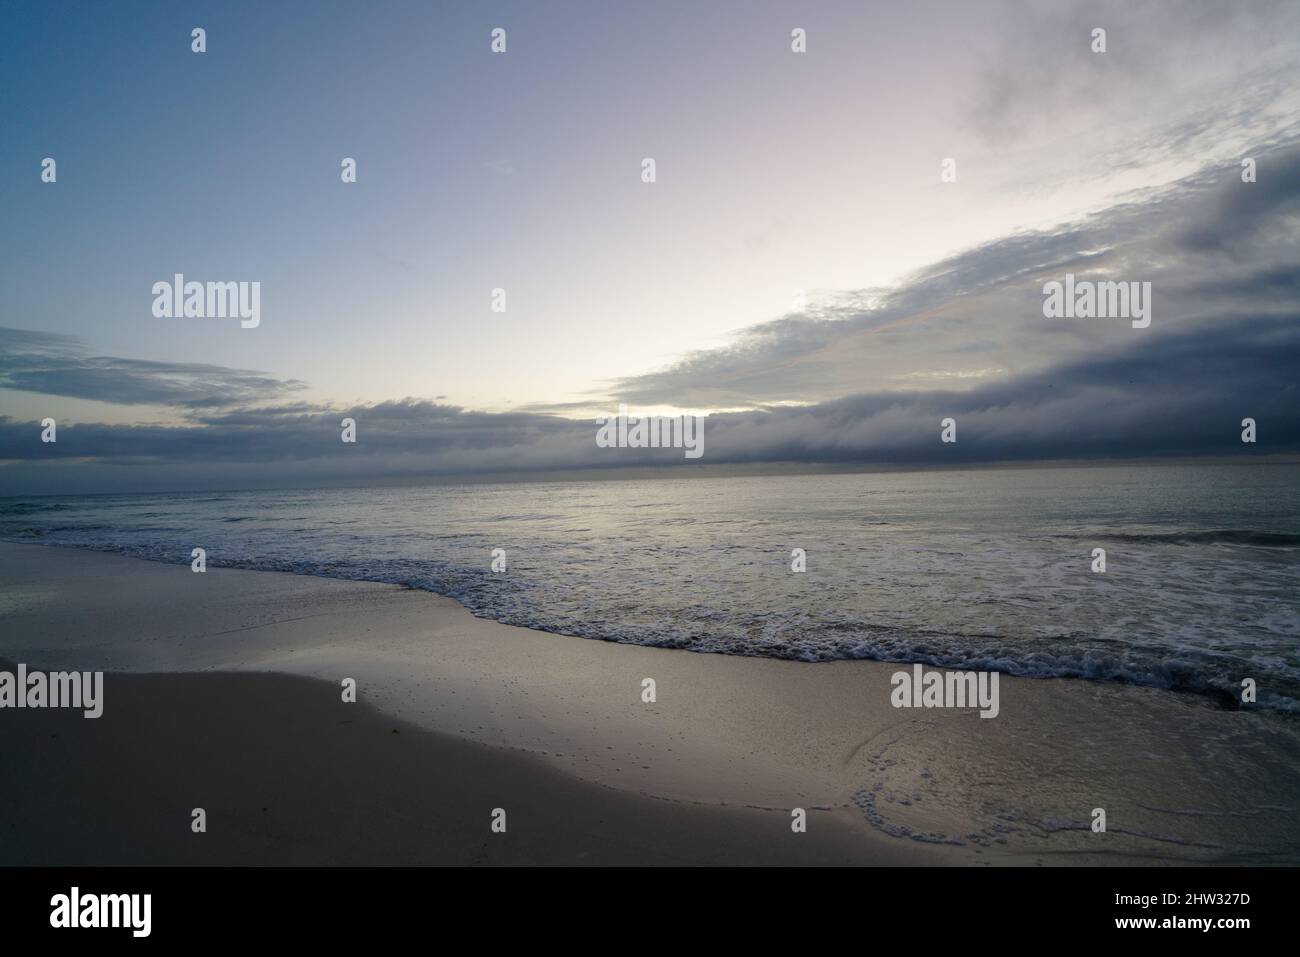 Scenic view on beach during sunrise Stock Photo